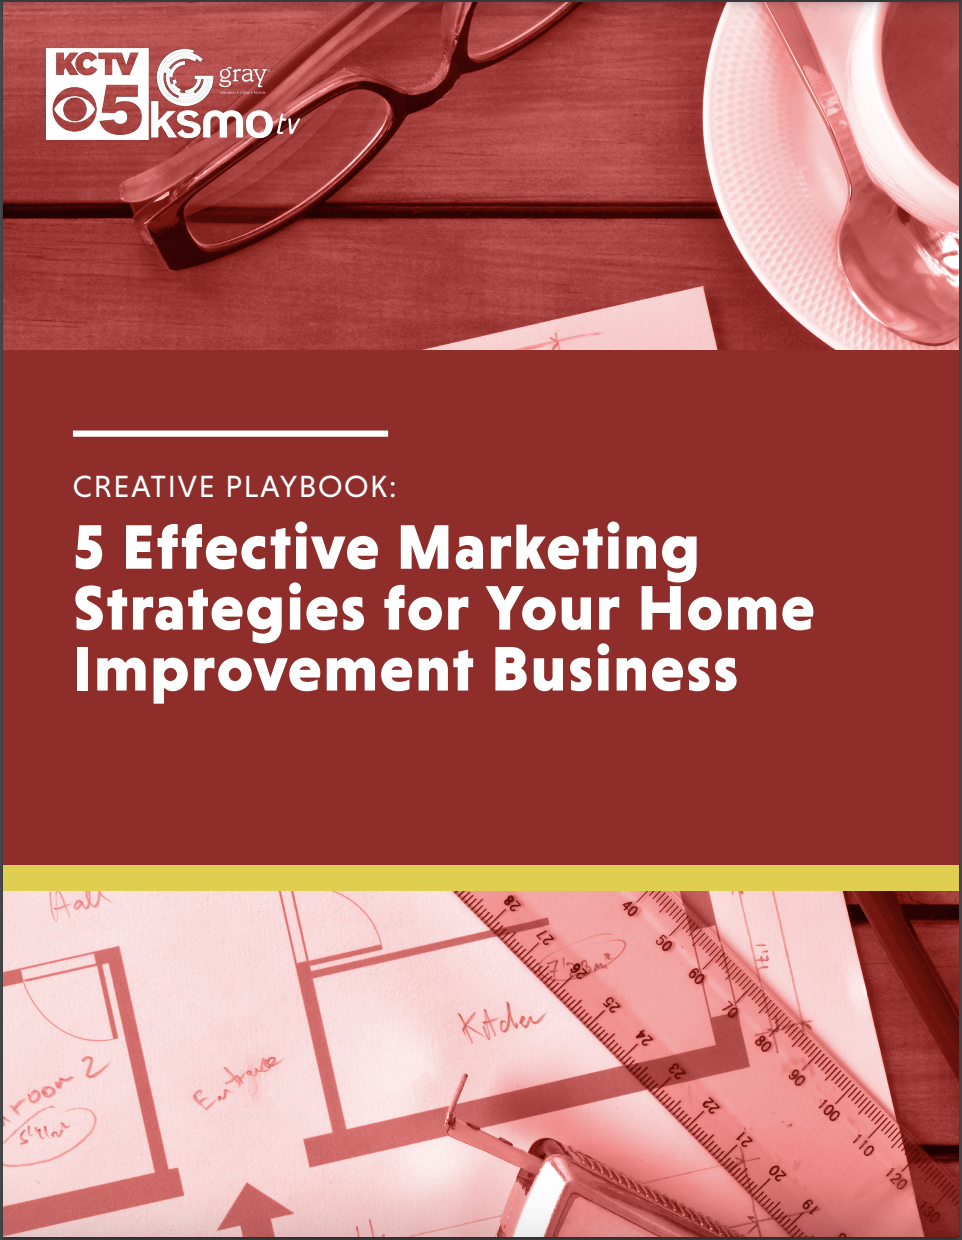 5 Effective Marketing Strategies for Your Home Improvement Business